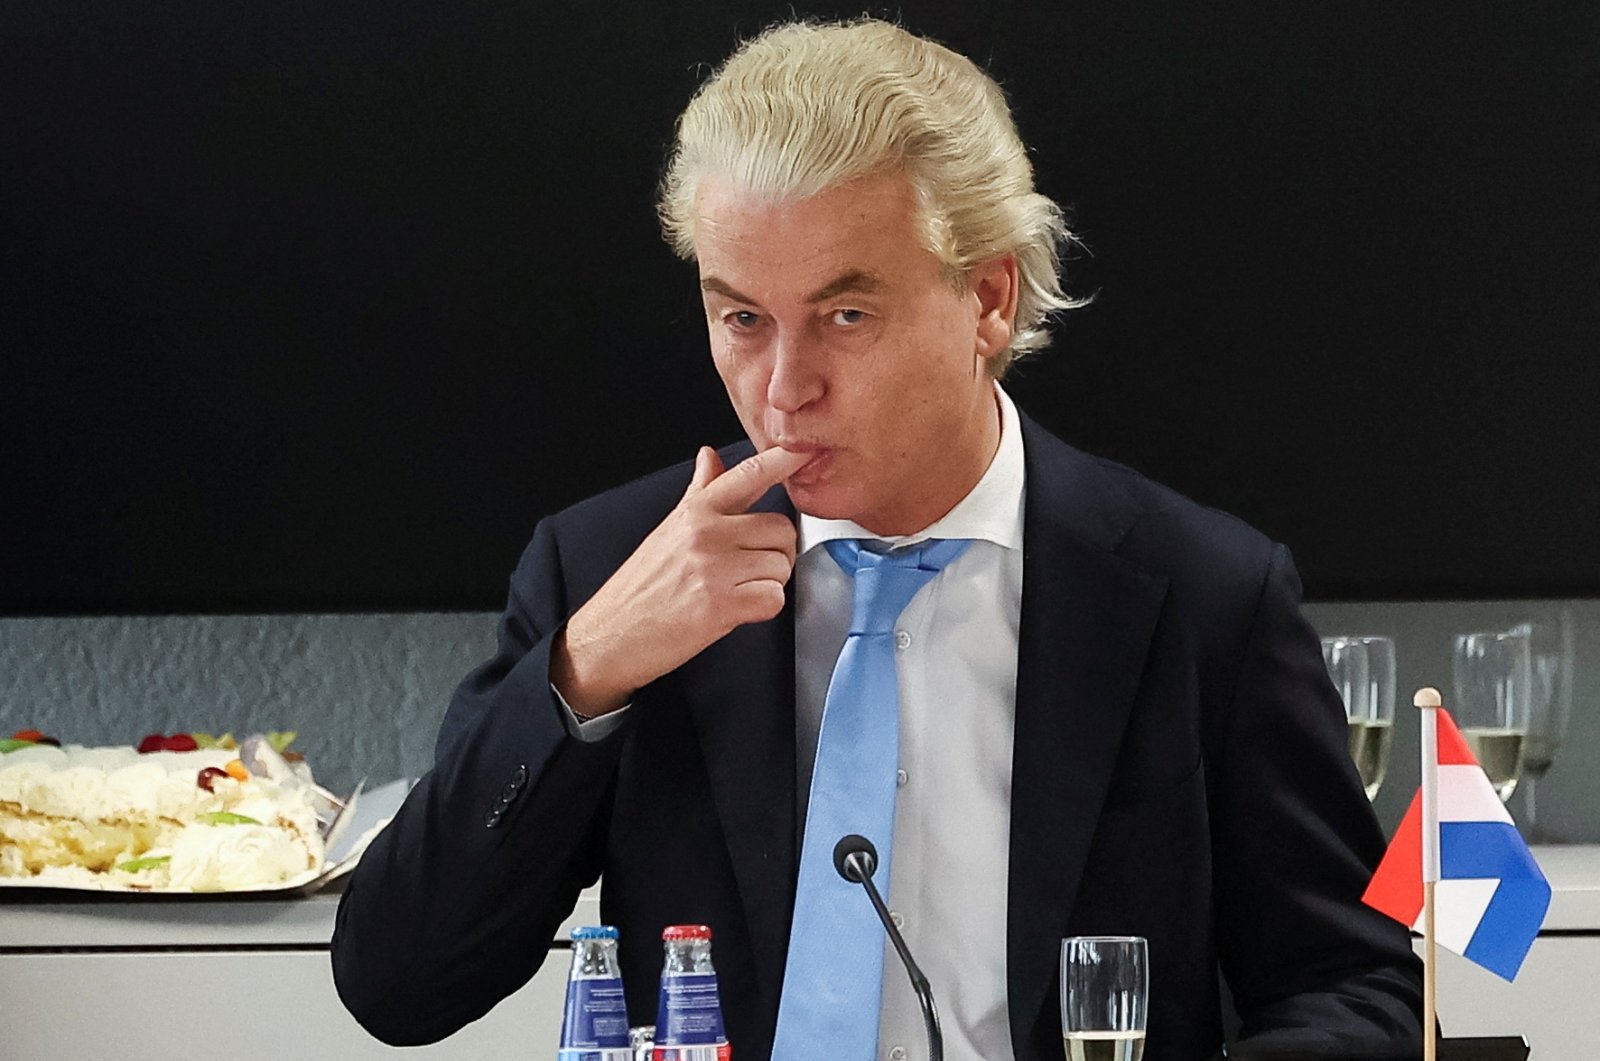 Dutch far-right politician Geert Wilders gestures at a meeting in The Hague, Netherlands, Nov. 23, 2023. (Reuters Photo)